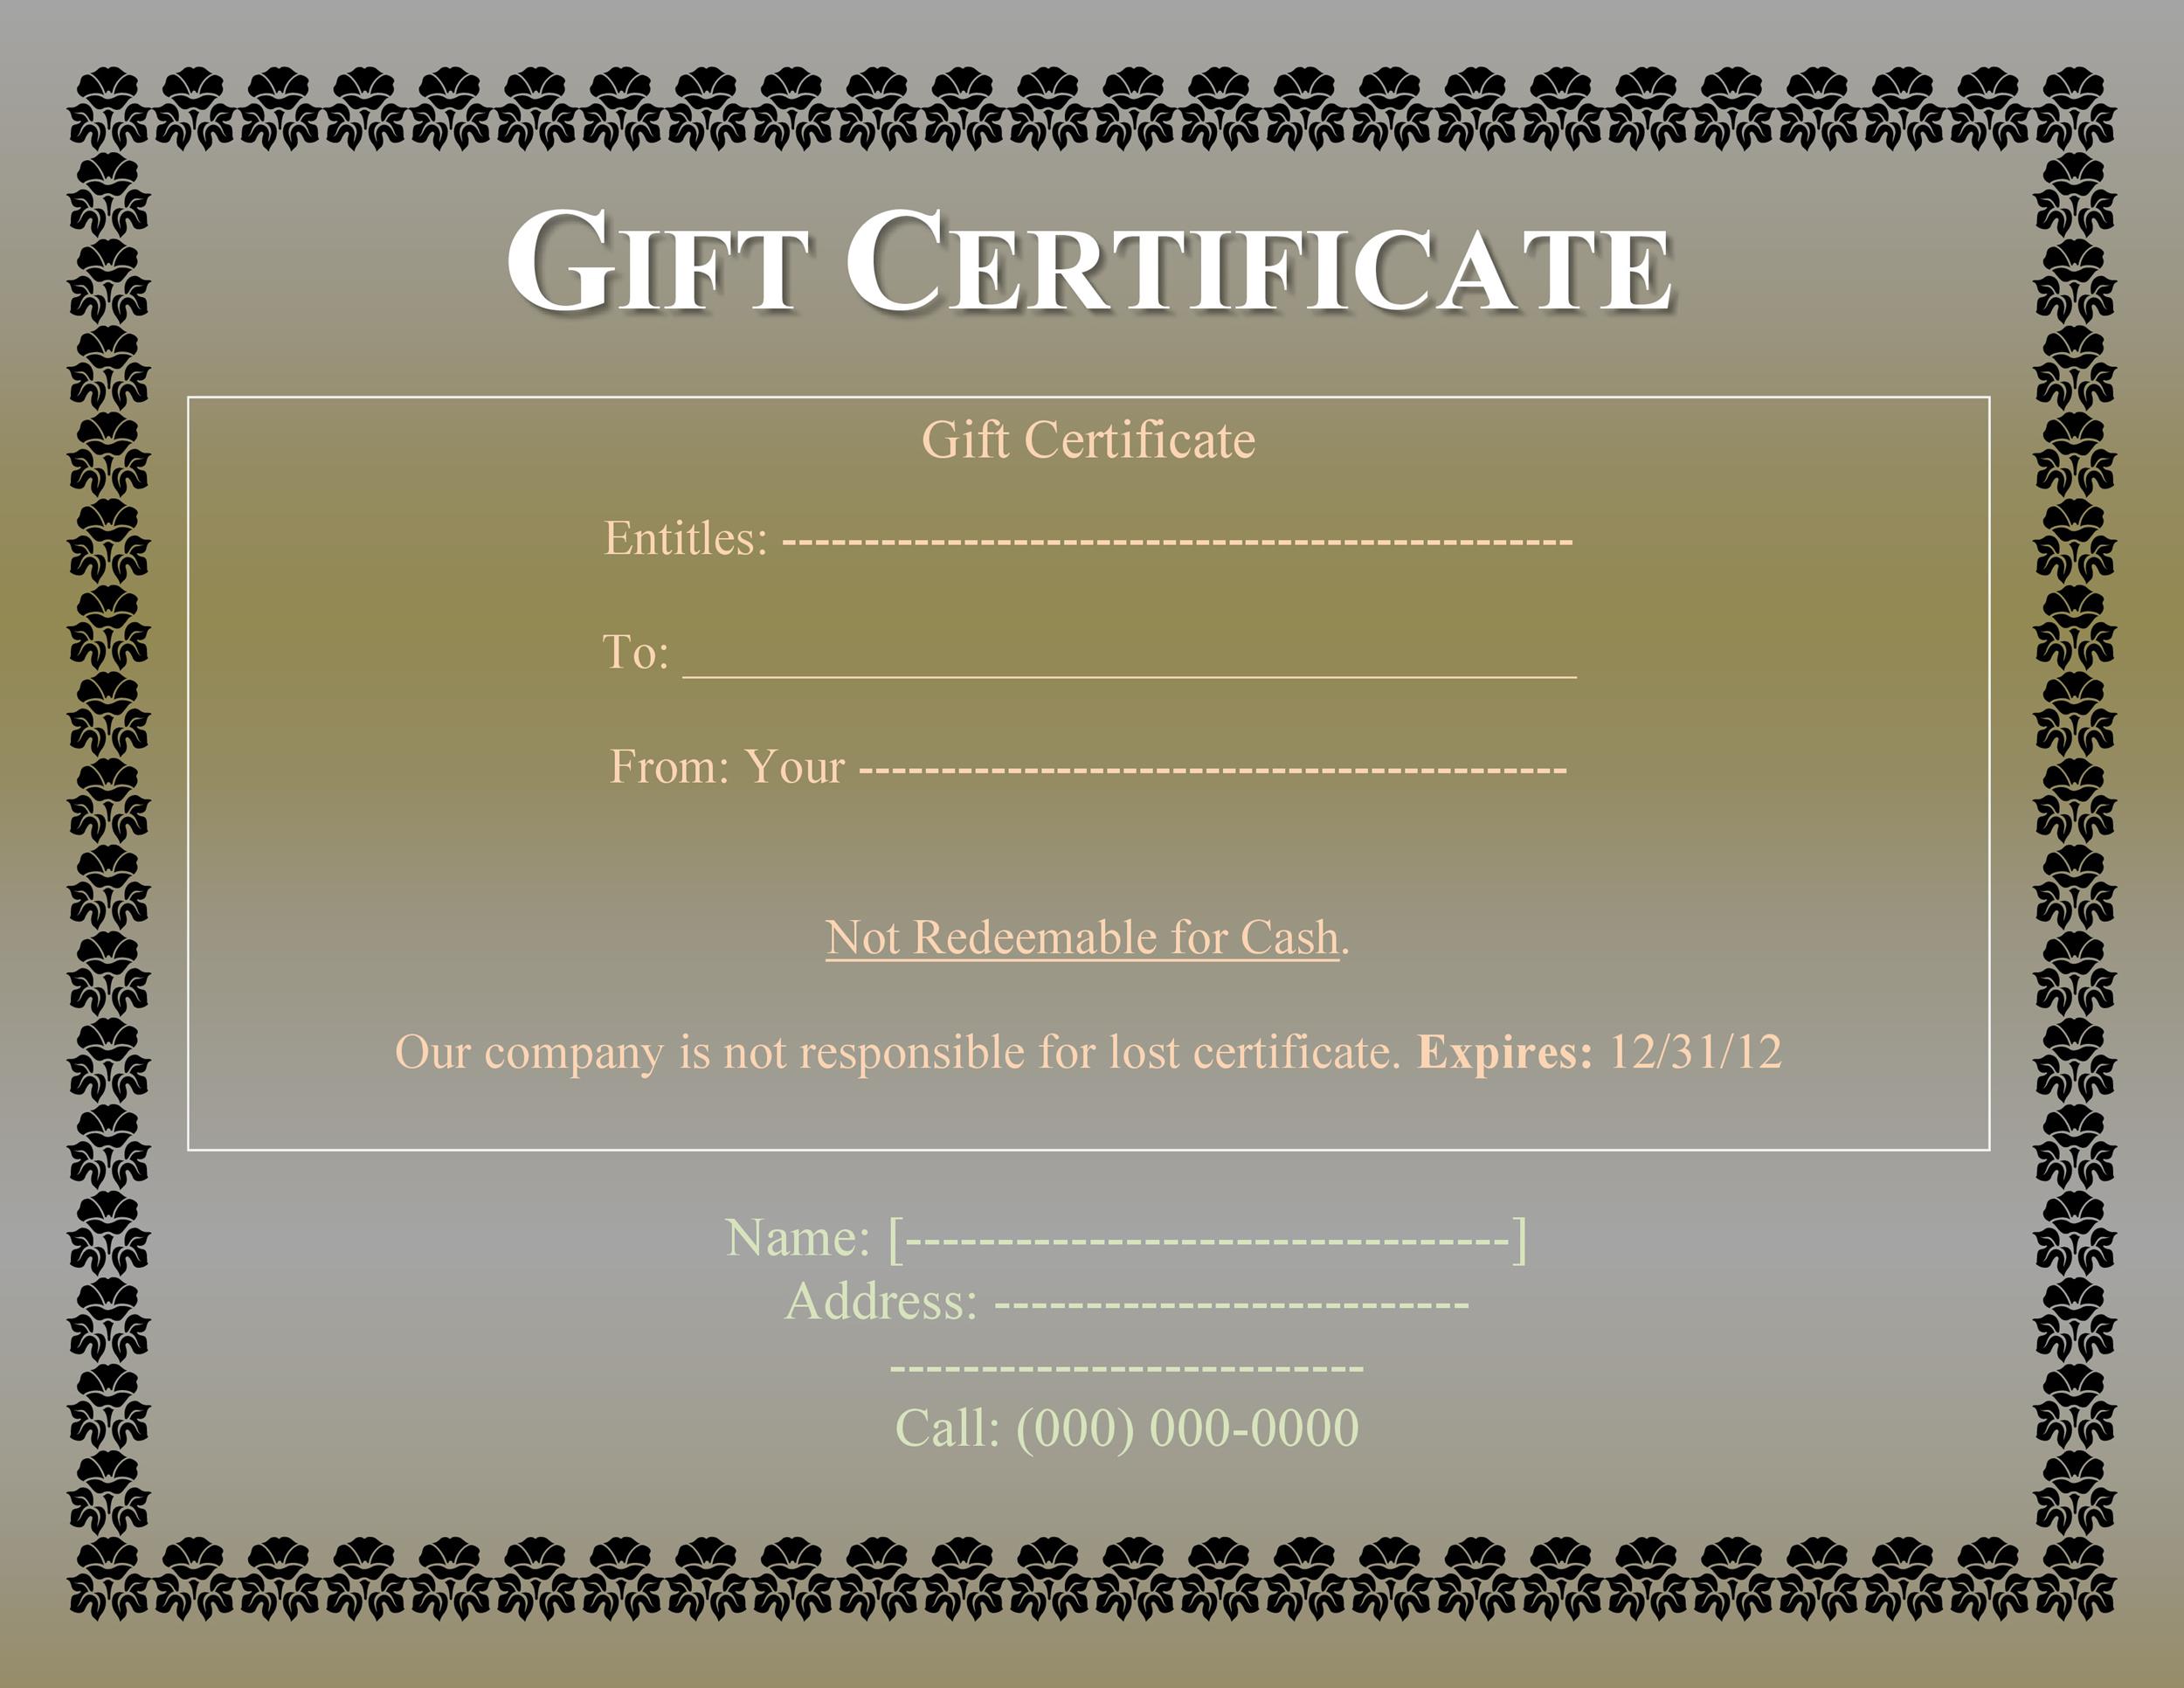 31  Free Gift Certificate Templates ᐅ TemplateLab